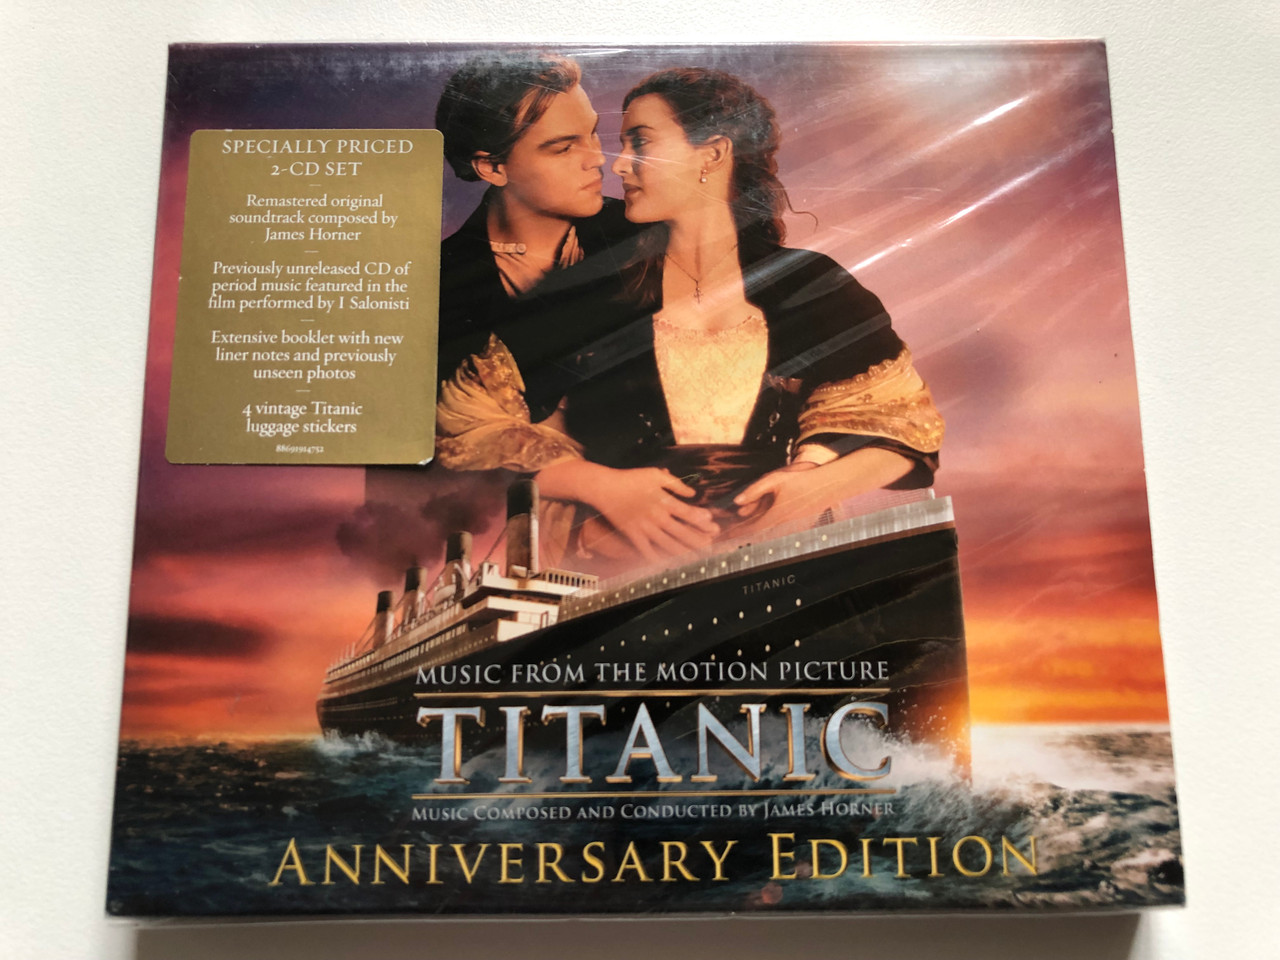 Titanic (Music From The Motion Picture) - Anniversary Edition - Music  Composed And Conducted By James Horner / Specially Priced 2-CD Set /  Masterworks 2x Audio CD 2012 / 88691964242 - bibleinmylanguage